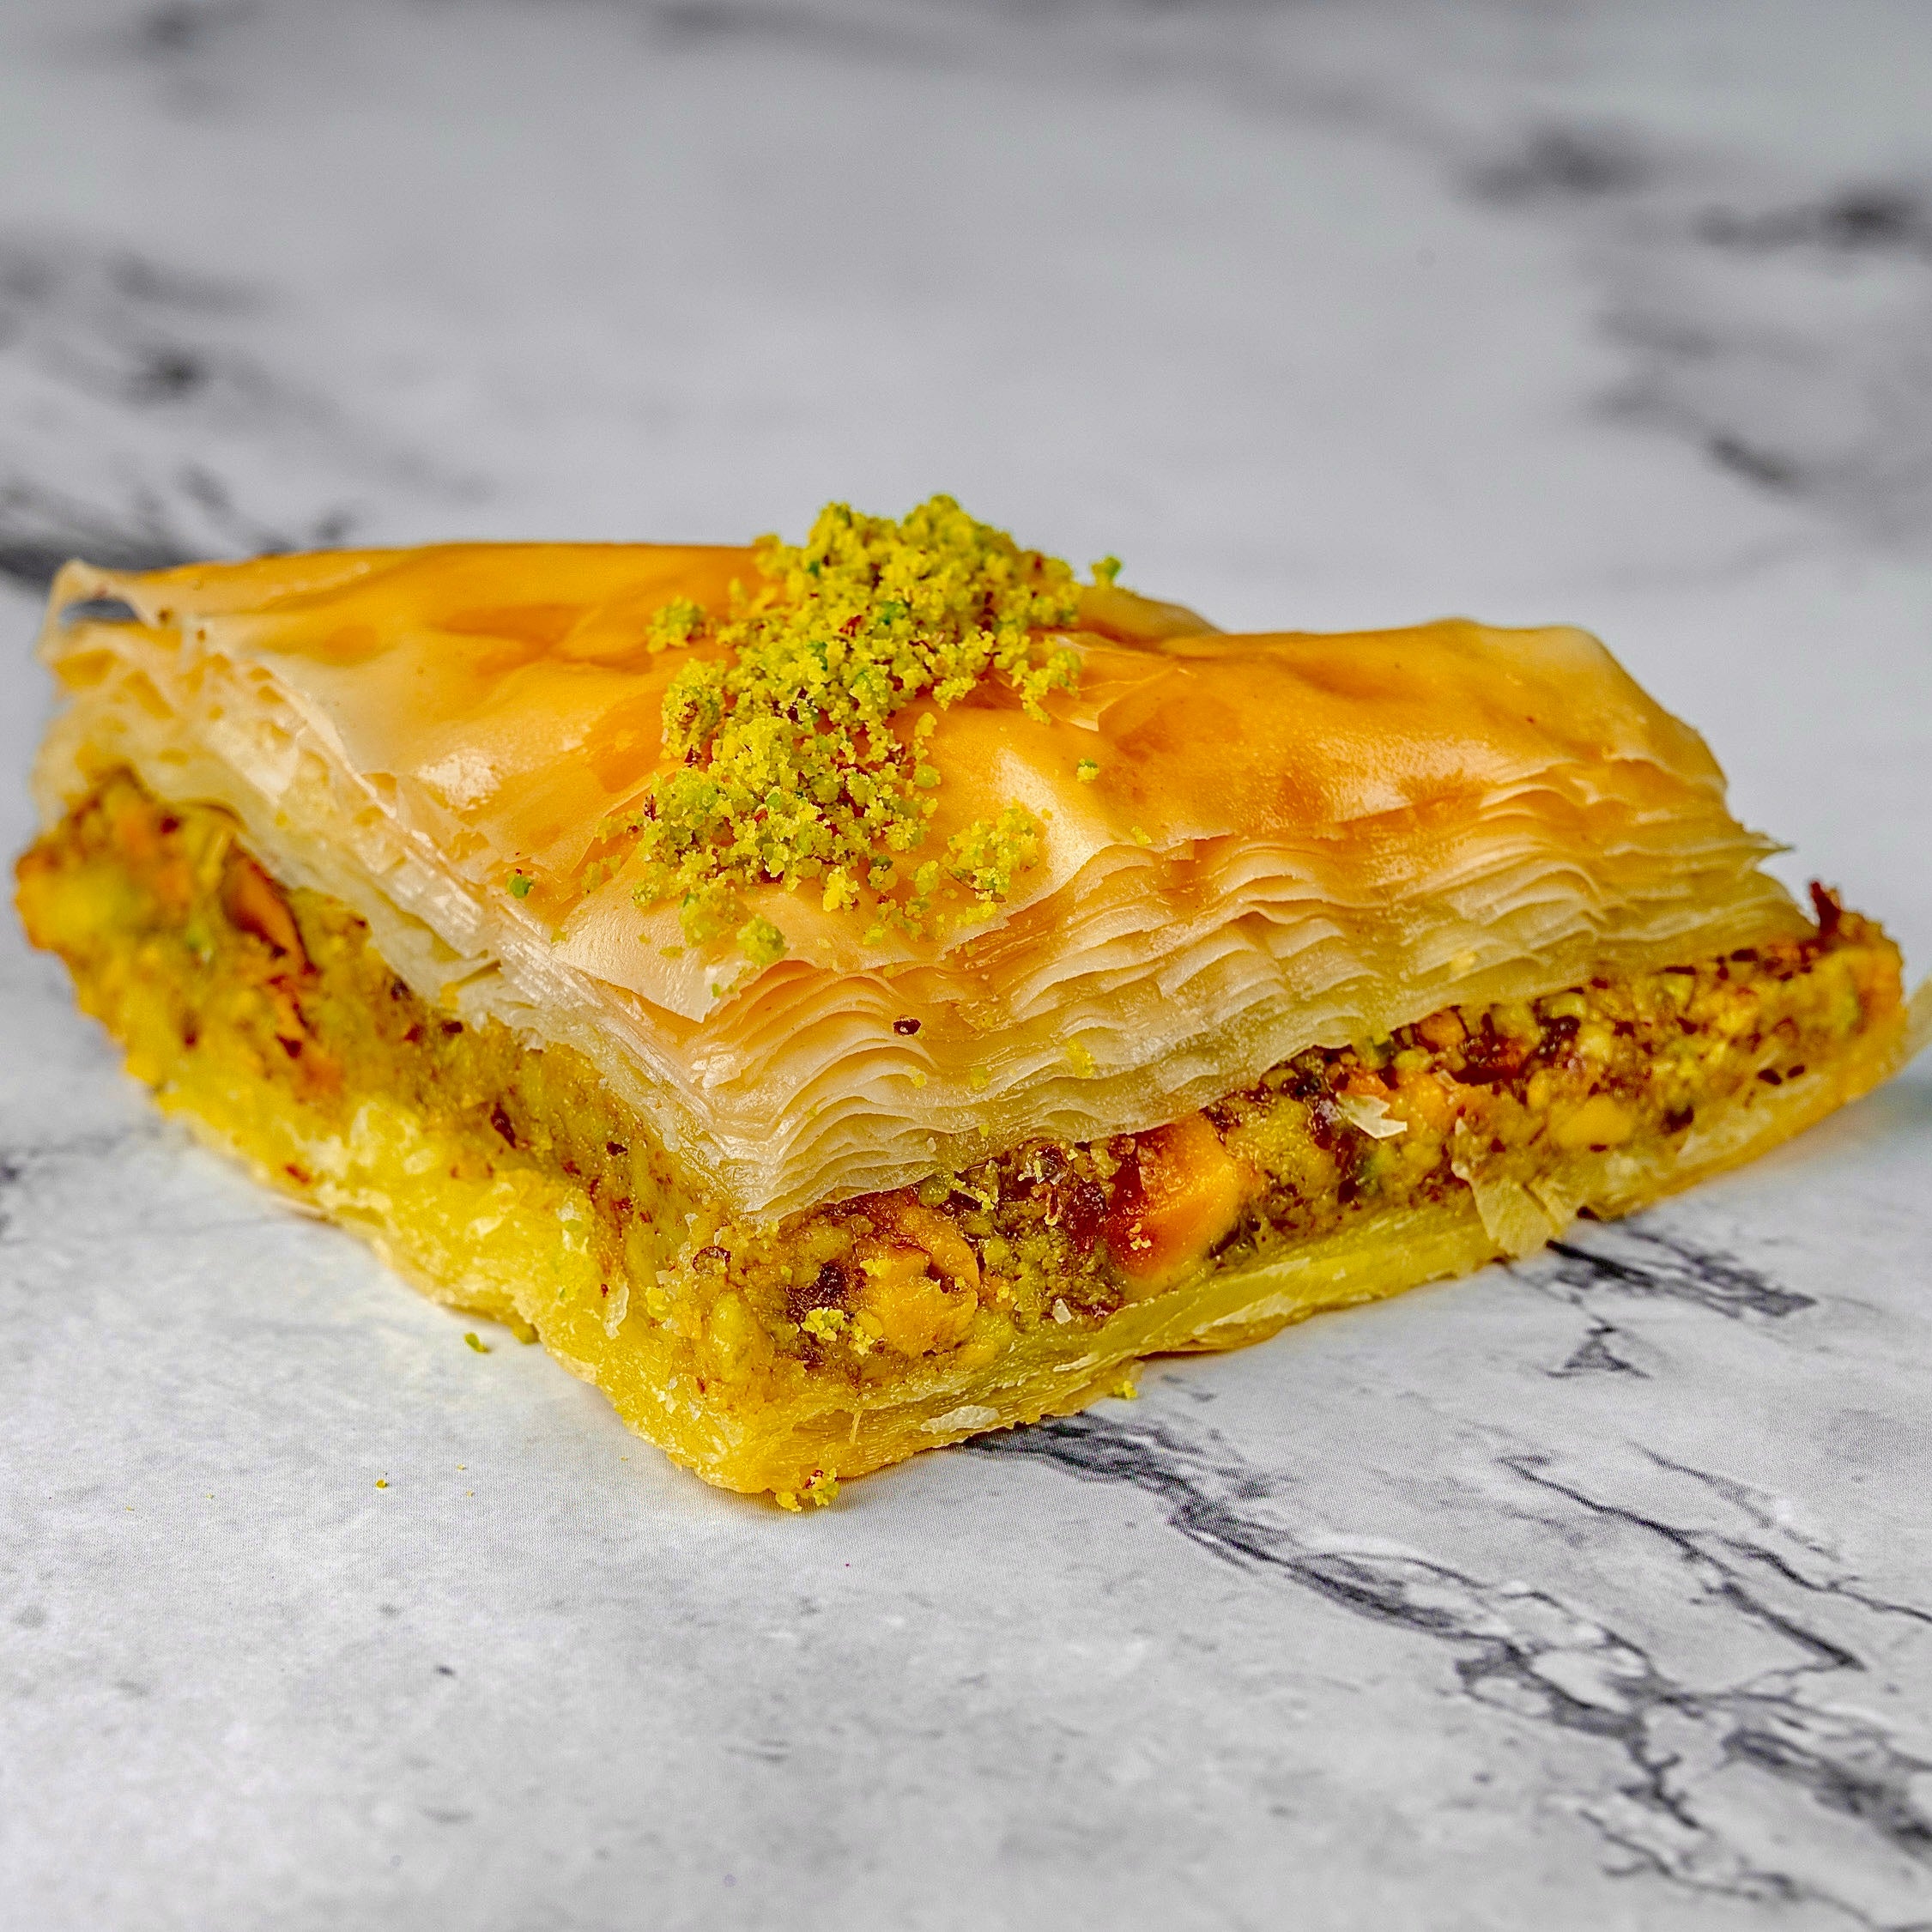 Middle Eastern Pastries – Baklava Bakery